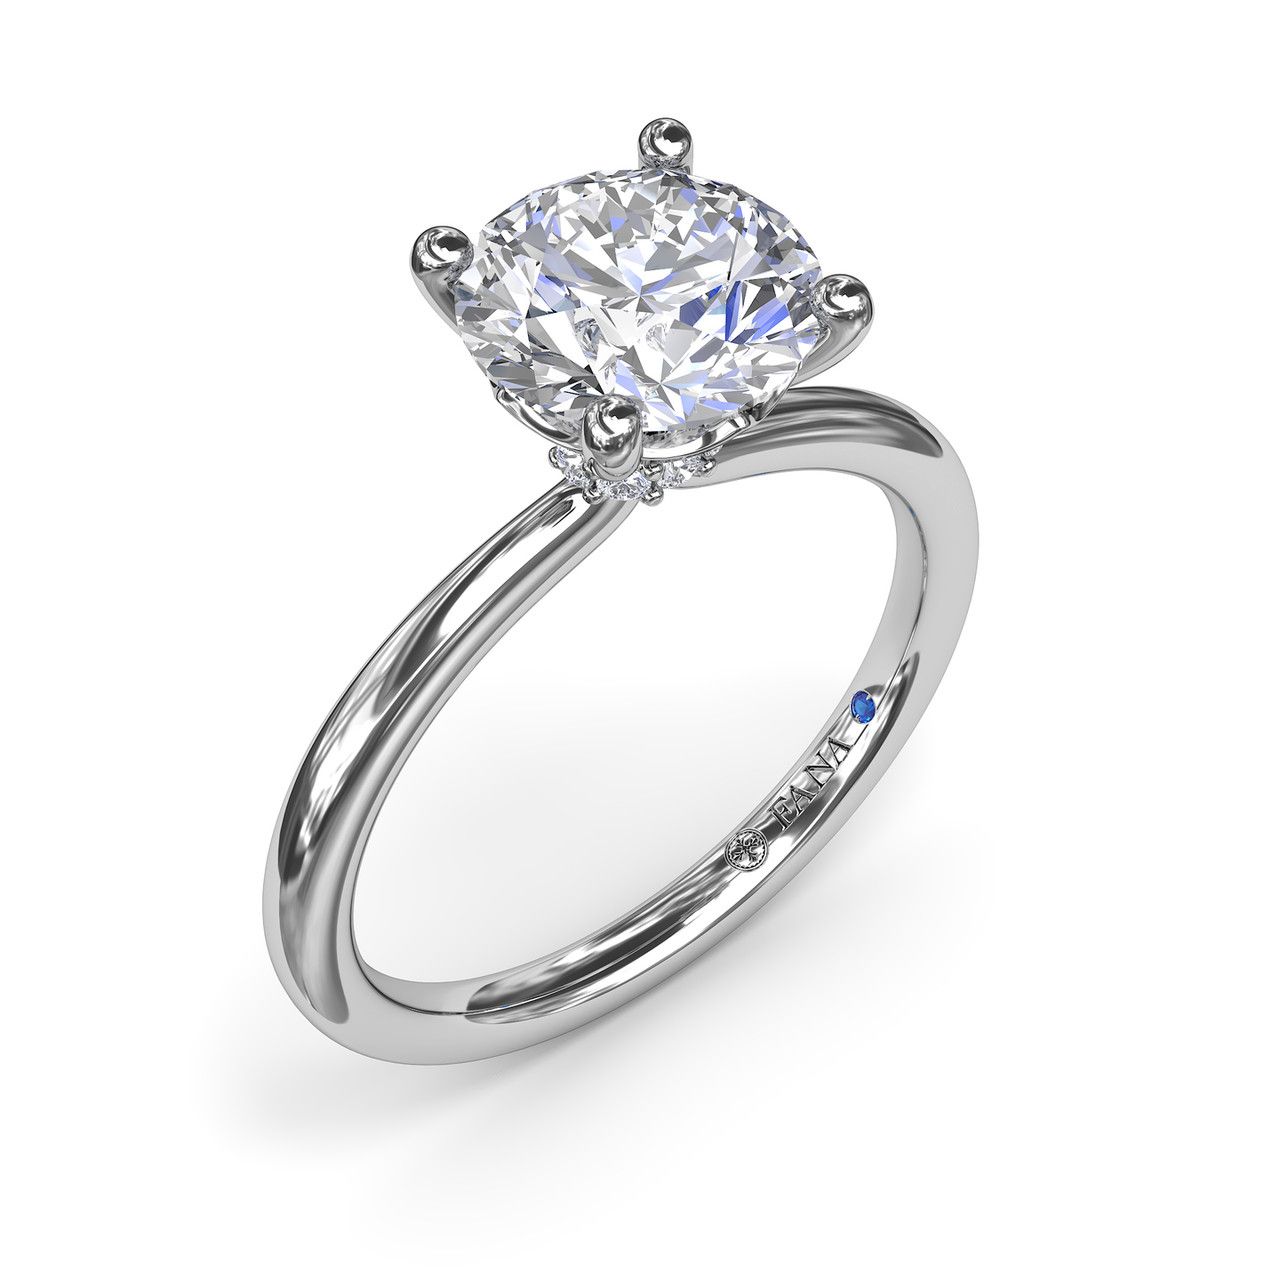 14K WHITE GOLD SOLITAIRE SEMI-MOUNT RING SIZE 6.5 WITH 8=0.06TW ROUND G-H VS2-SI1 DIAMONDS AND ONE ROUND BLUE SAPPHIRE   (3.05 GRAMS)